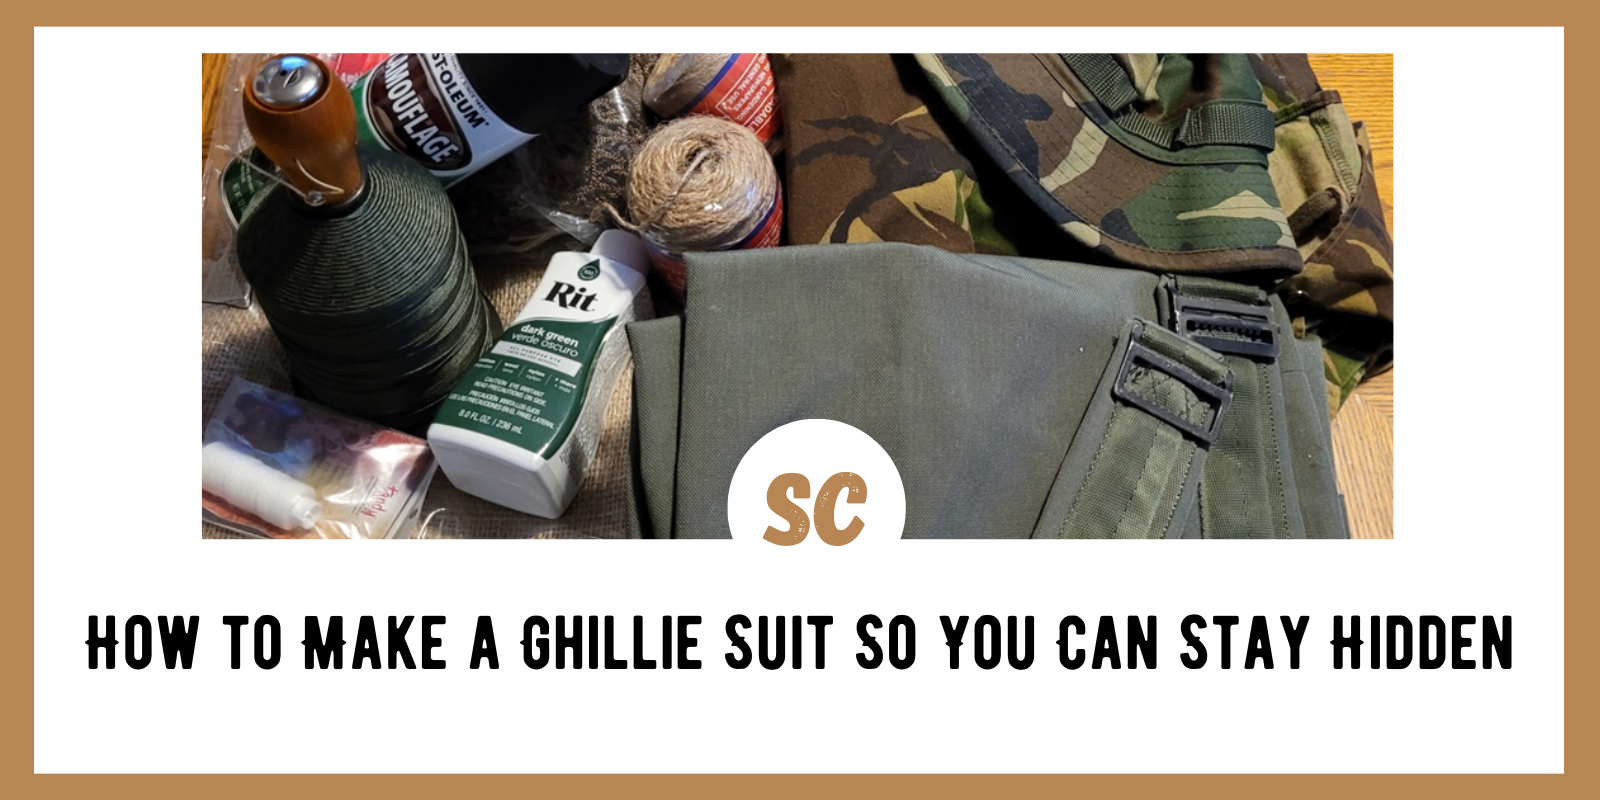 How to Make a Ghillie Suit So You Can Stay Hidden